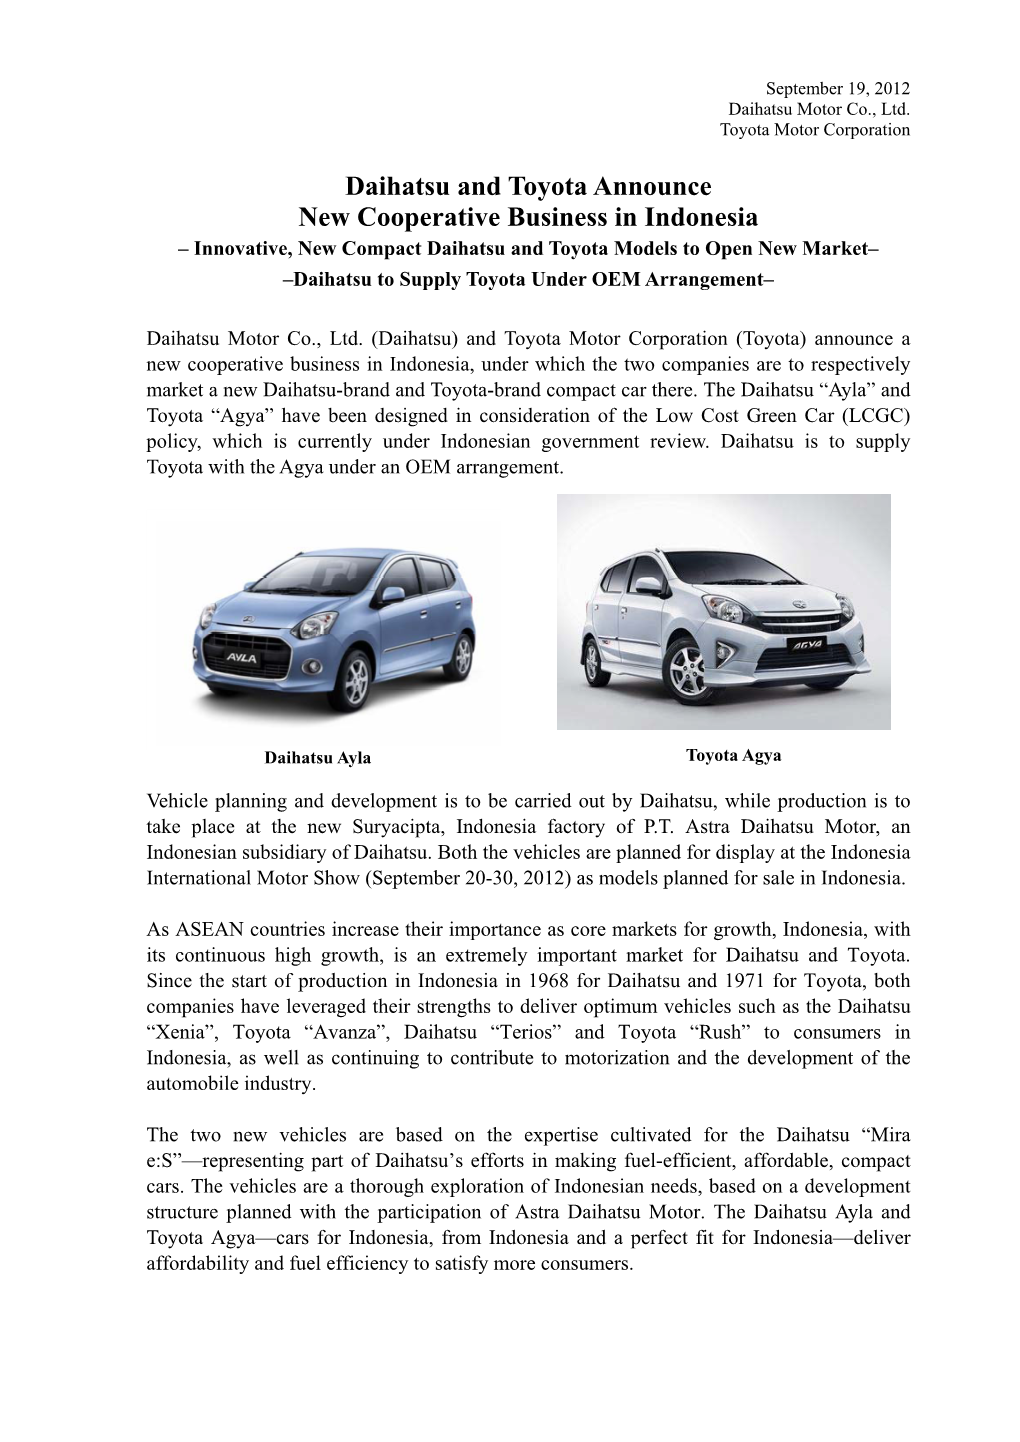 Daihatsu and Toyota Announce New Cooperative Business in Indonesia